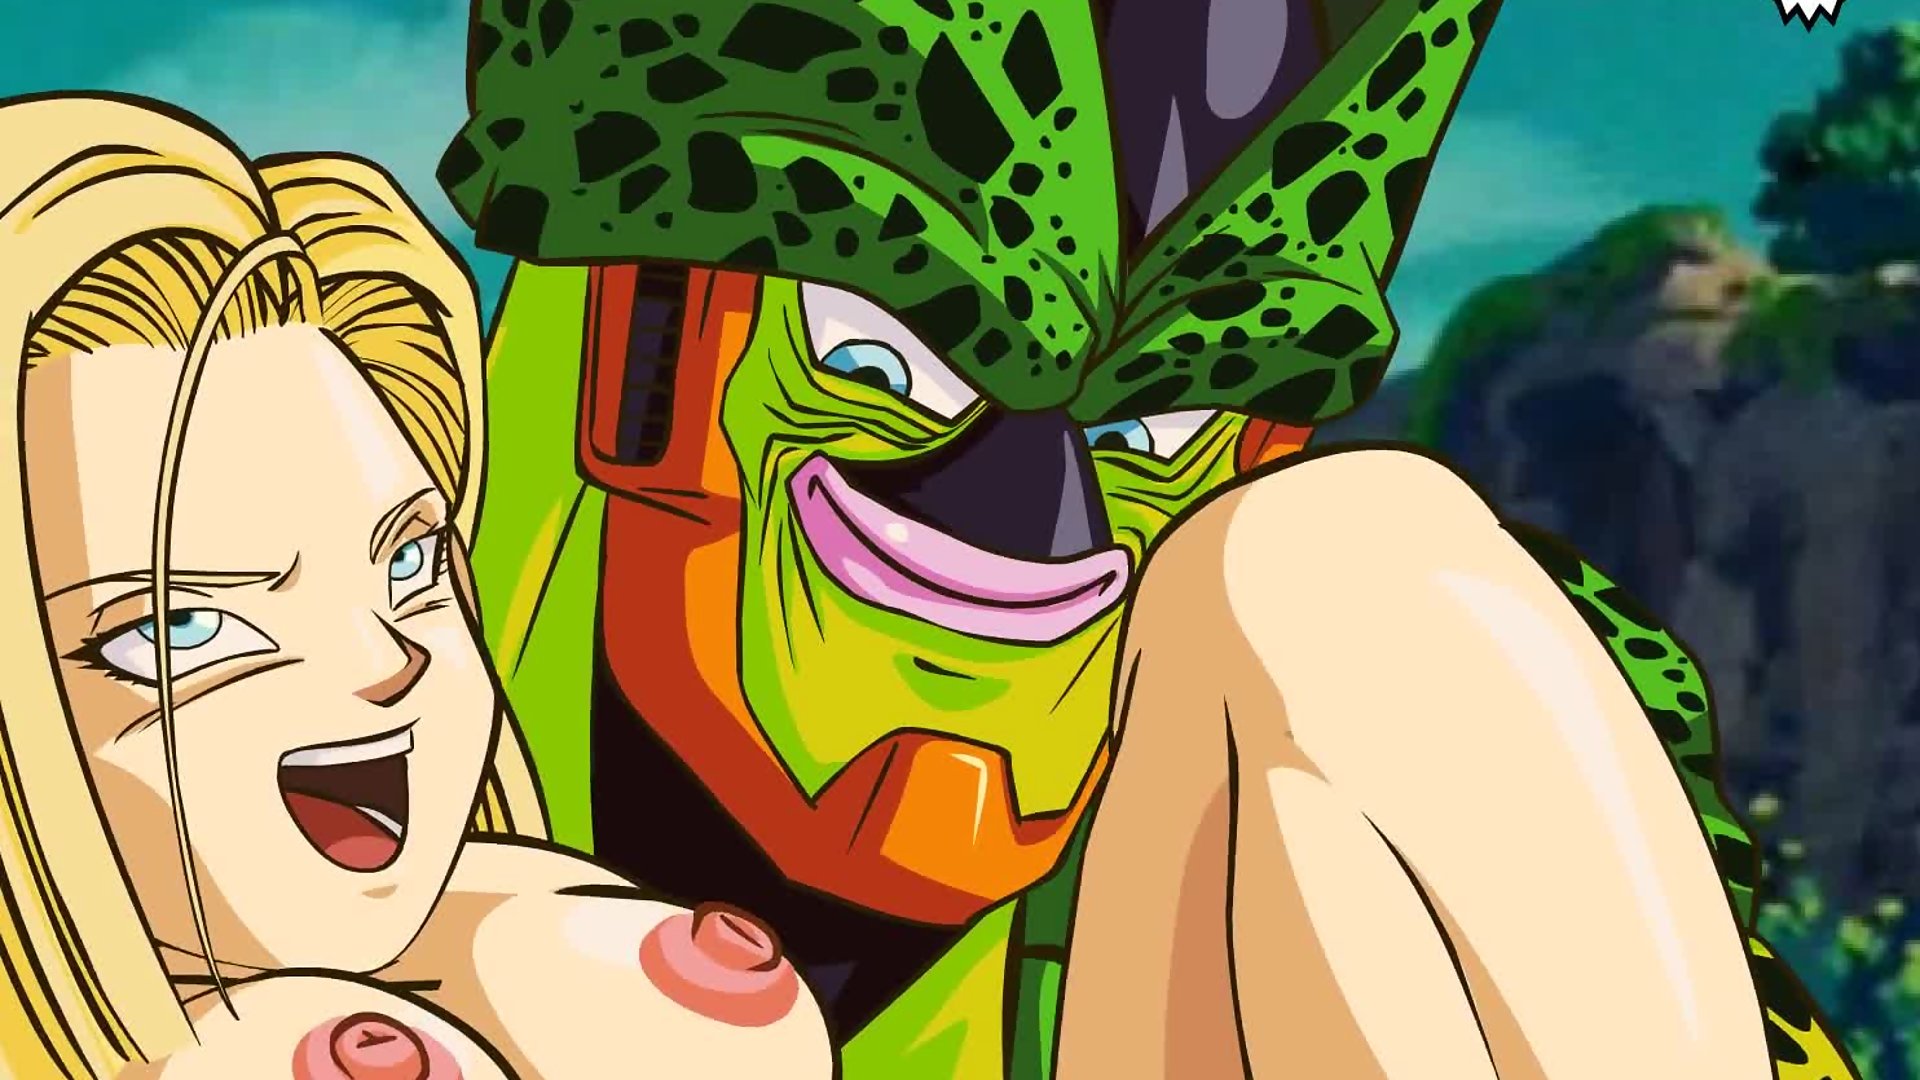 Dragonball Cell rough anal fucks Android 18 with his tail